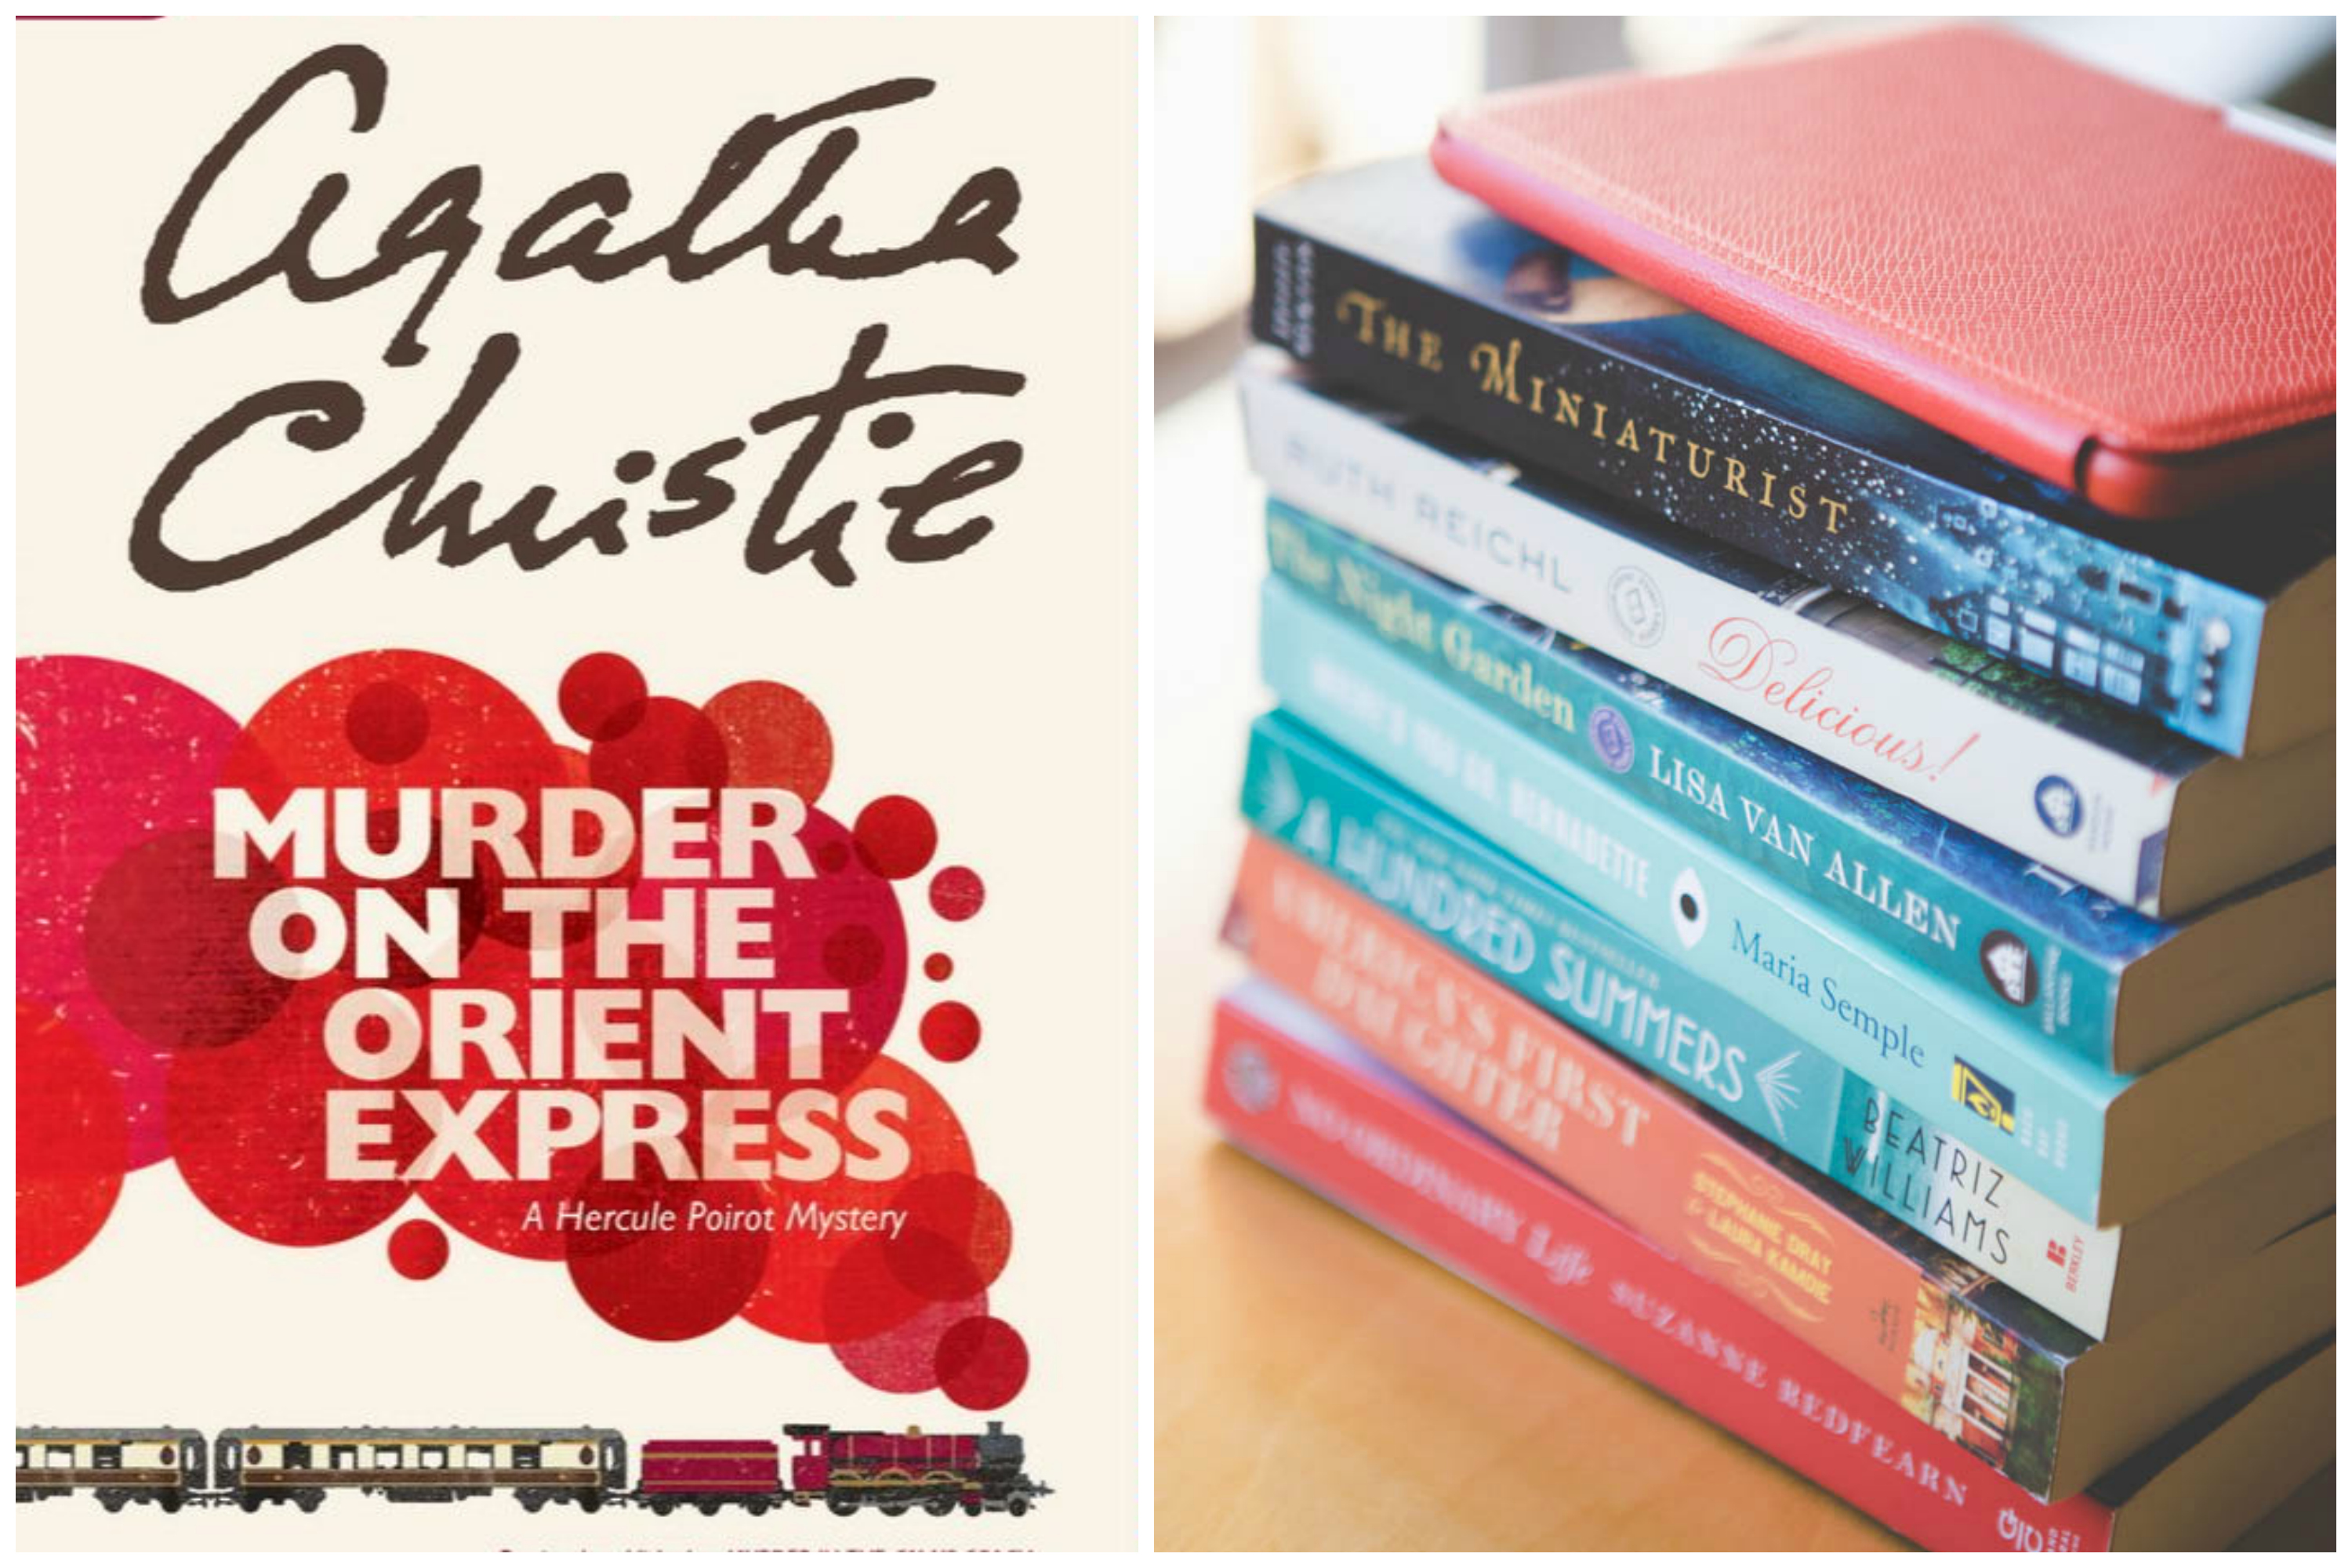 Murder on the Orient Express by Agatha Christie3000 x 2000